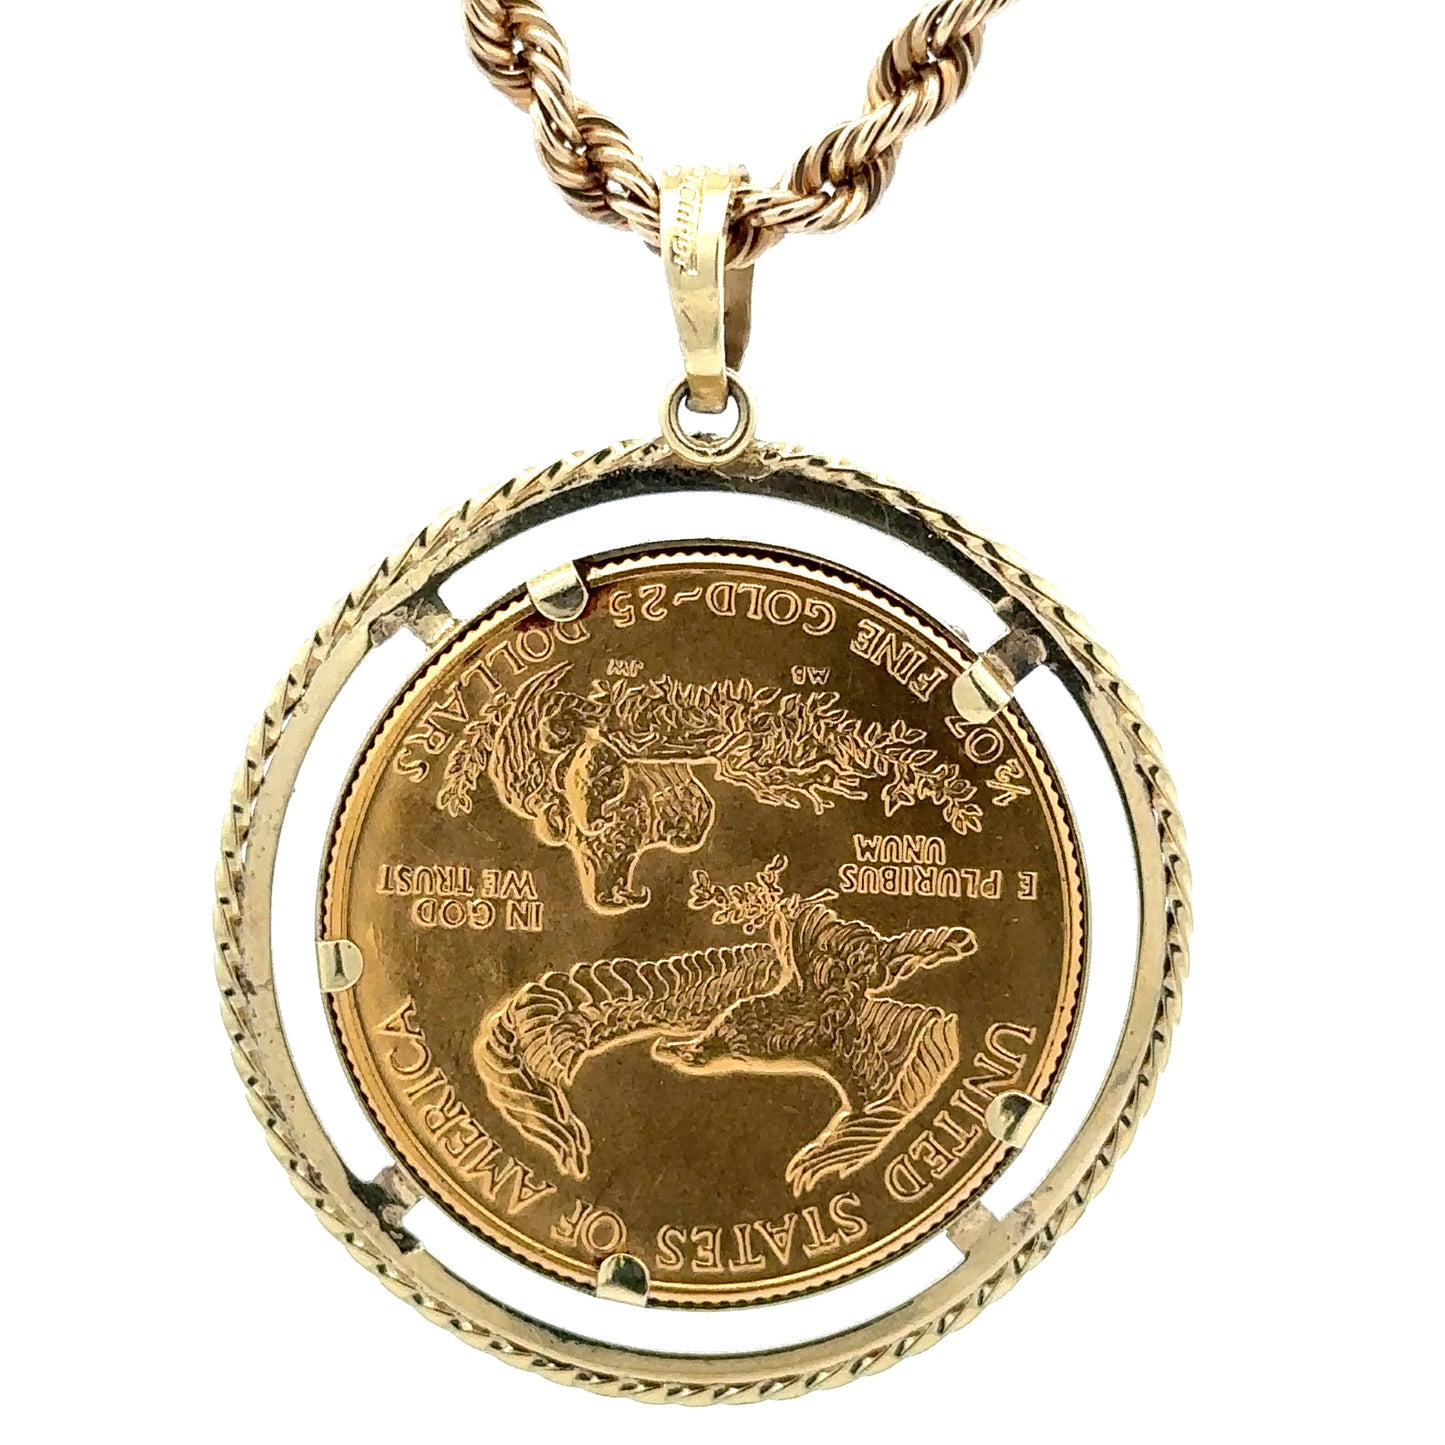 back of coin pendant. The coin is upside down for the back